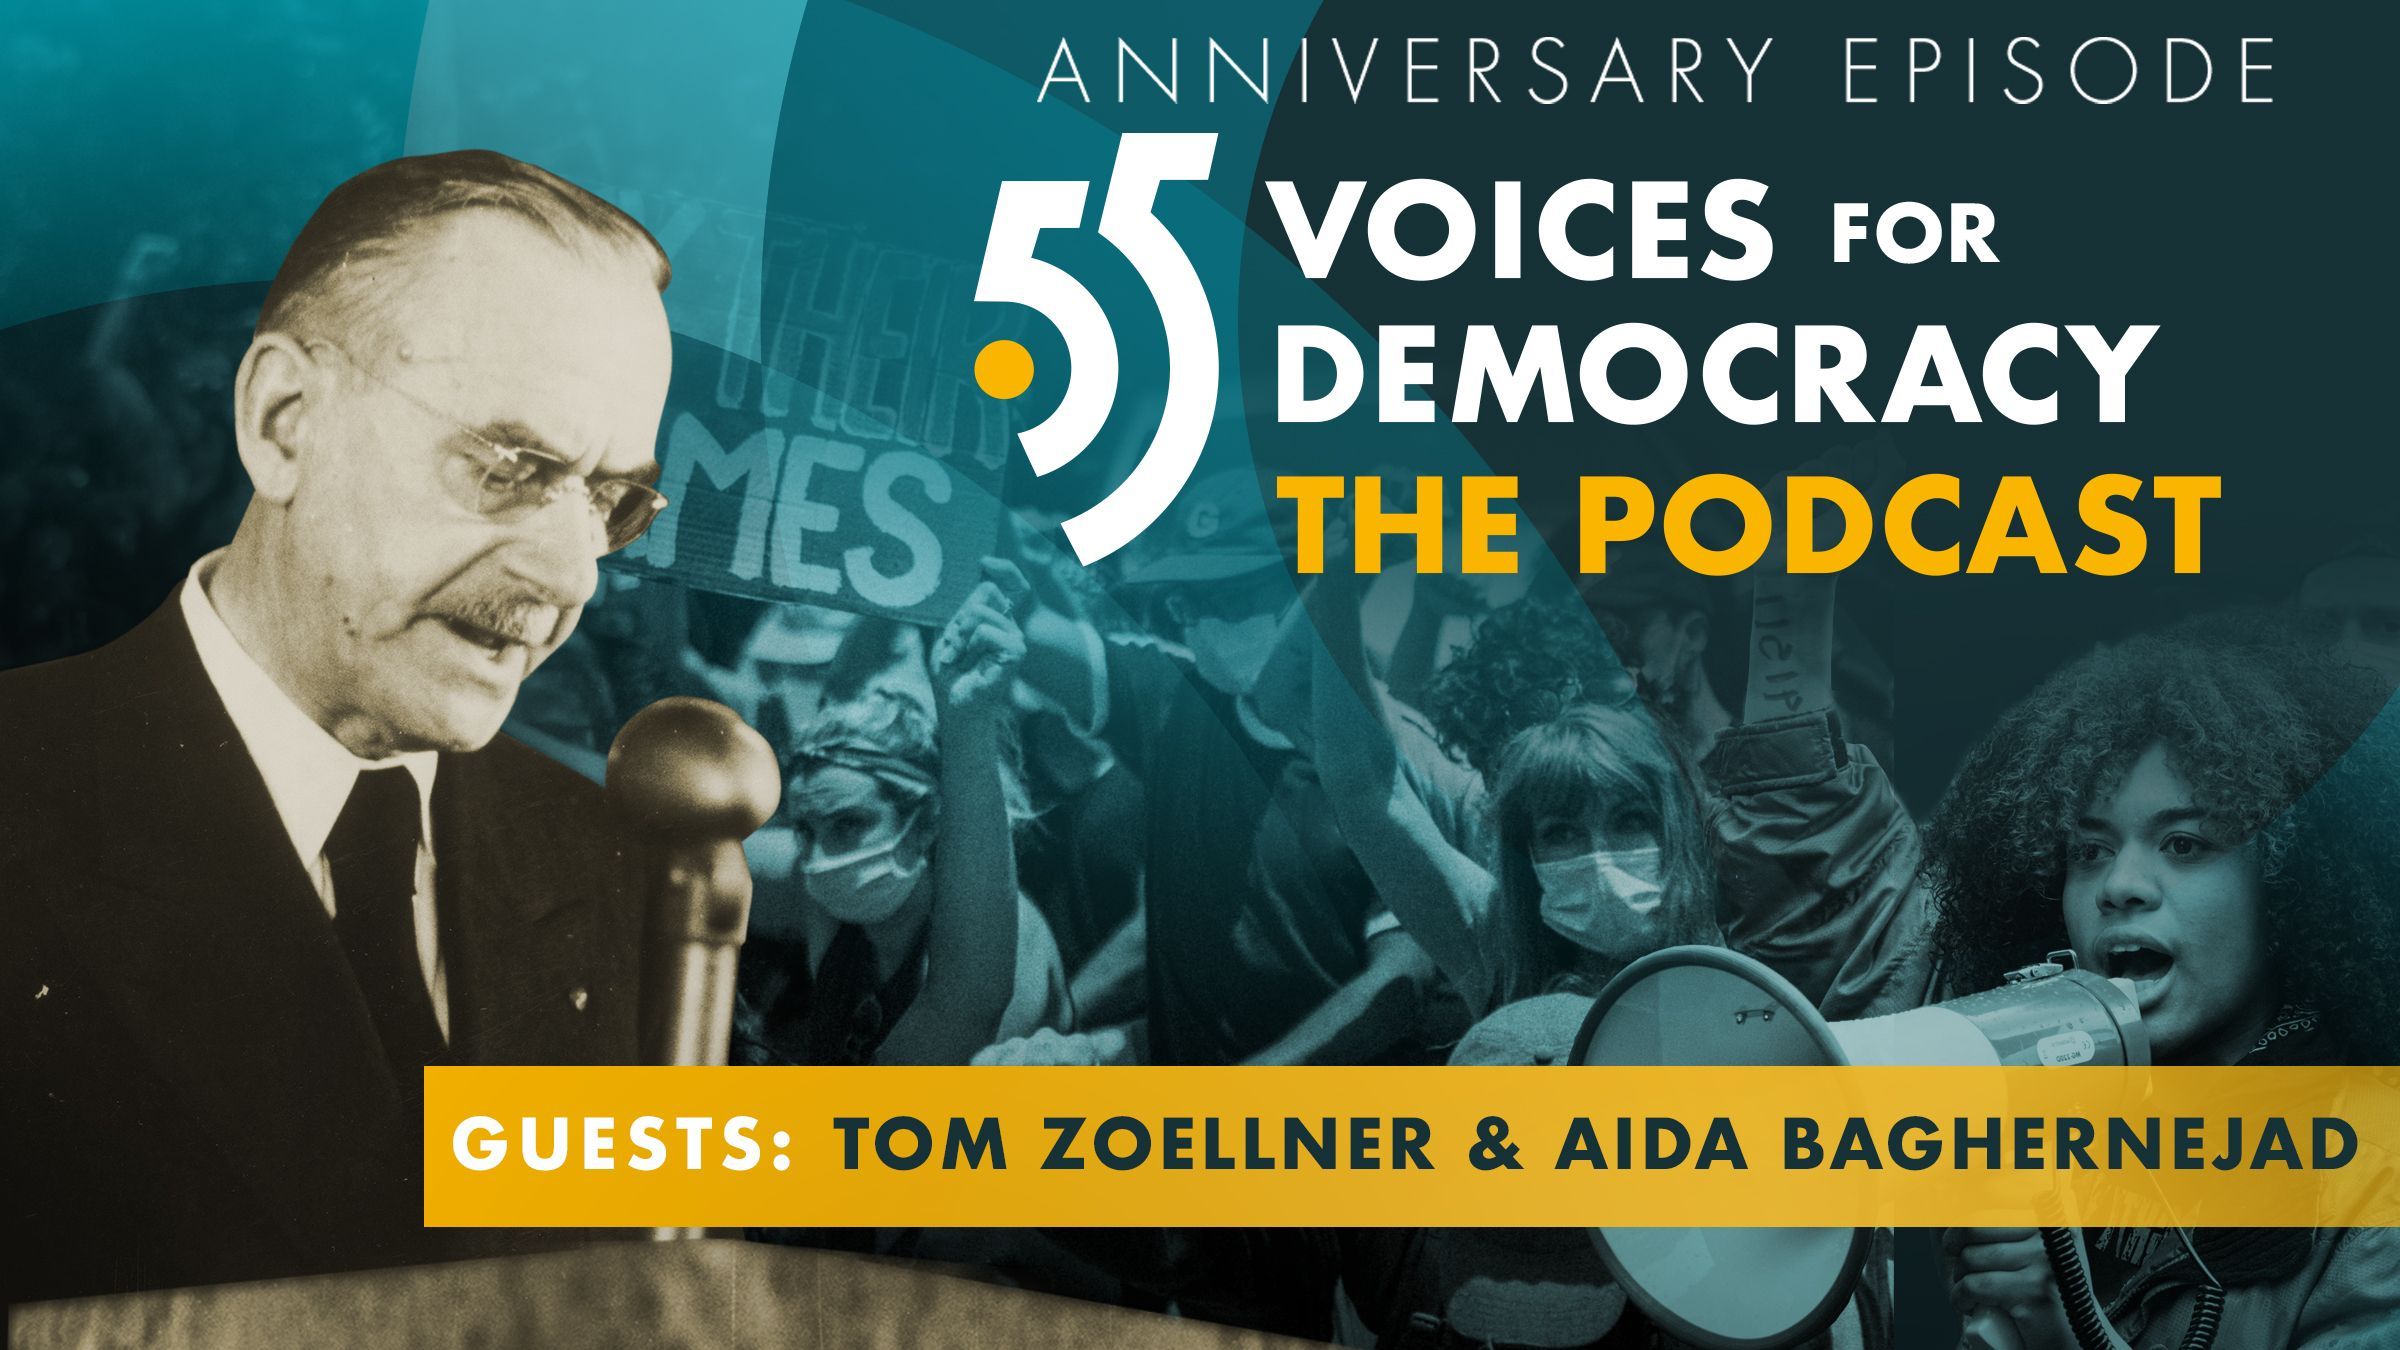 Anniversary Episode: One Year of 55 Voices for Democracy Podcast